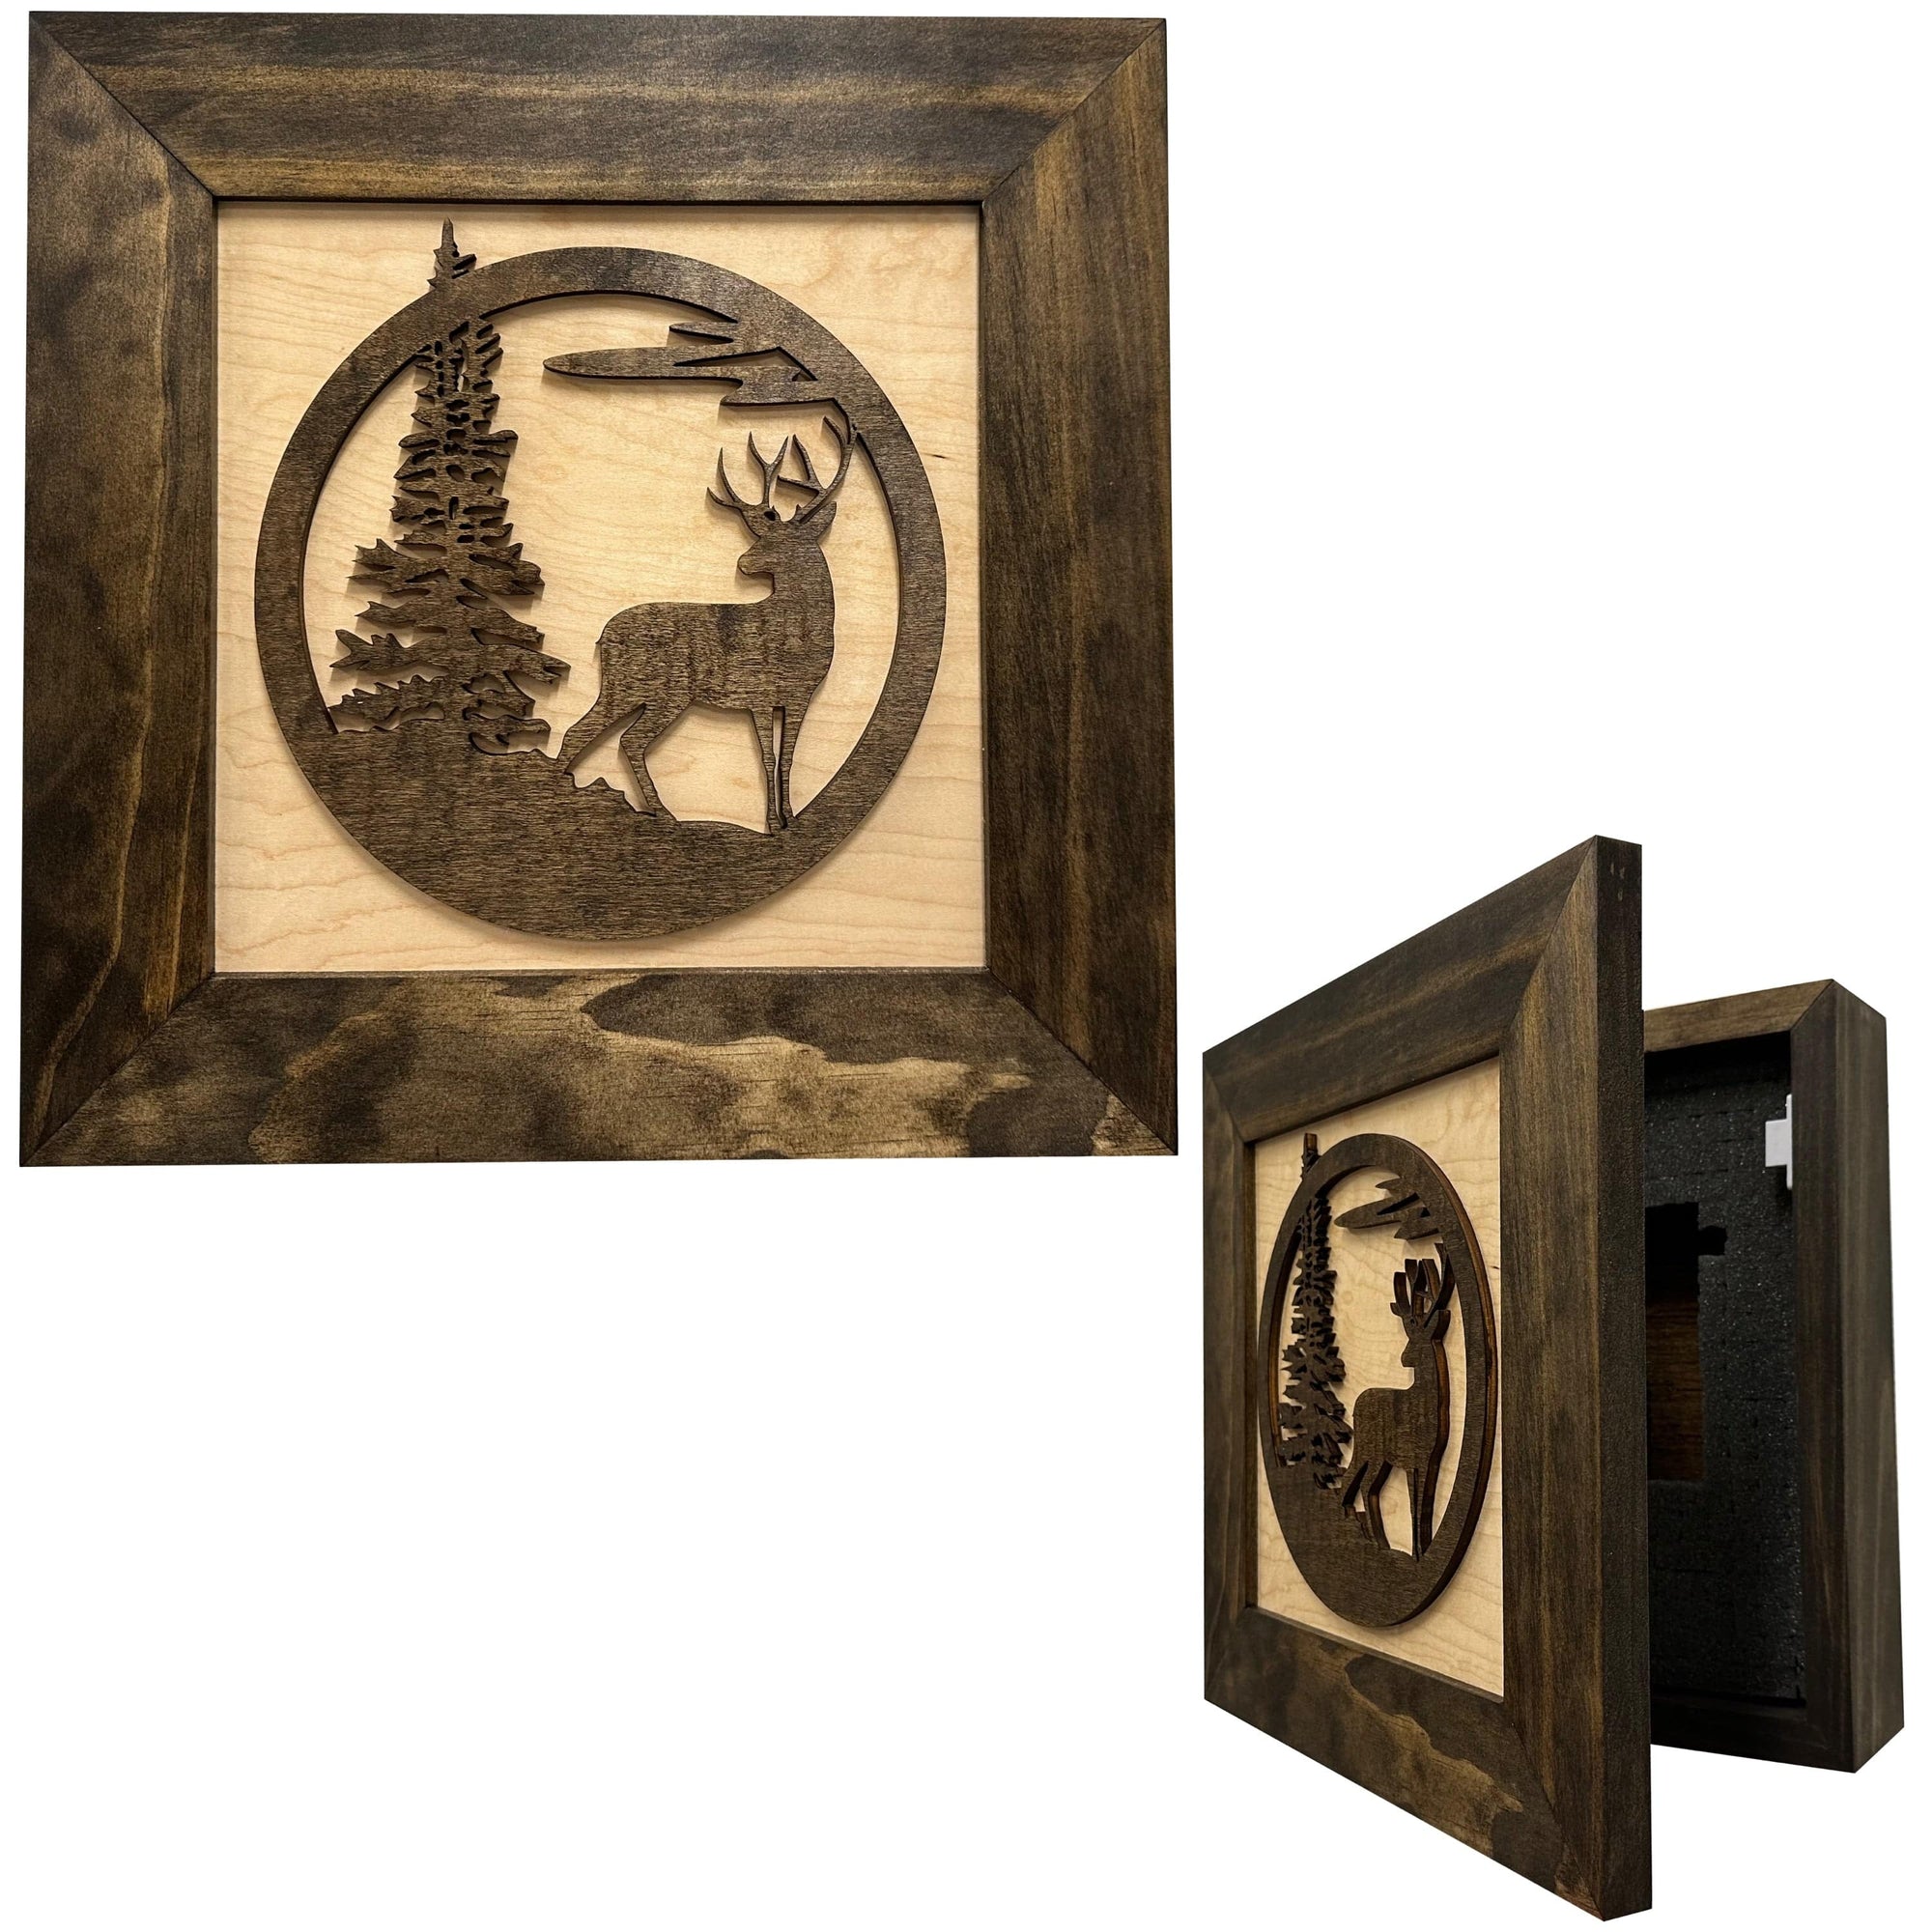 Buck in Nature Decorative Wall-Mounted Gun Cabinet - Gun Safe To Securely Store Your Gun And Other Home Defense Gear Armadillo Safe and Vault